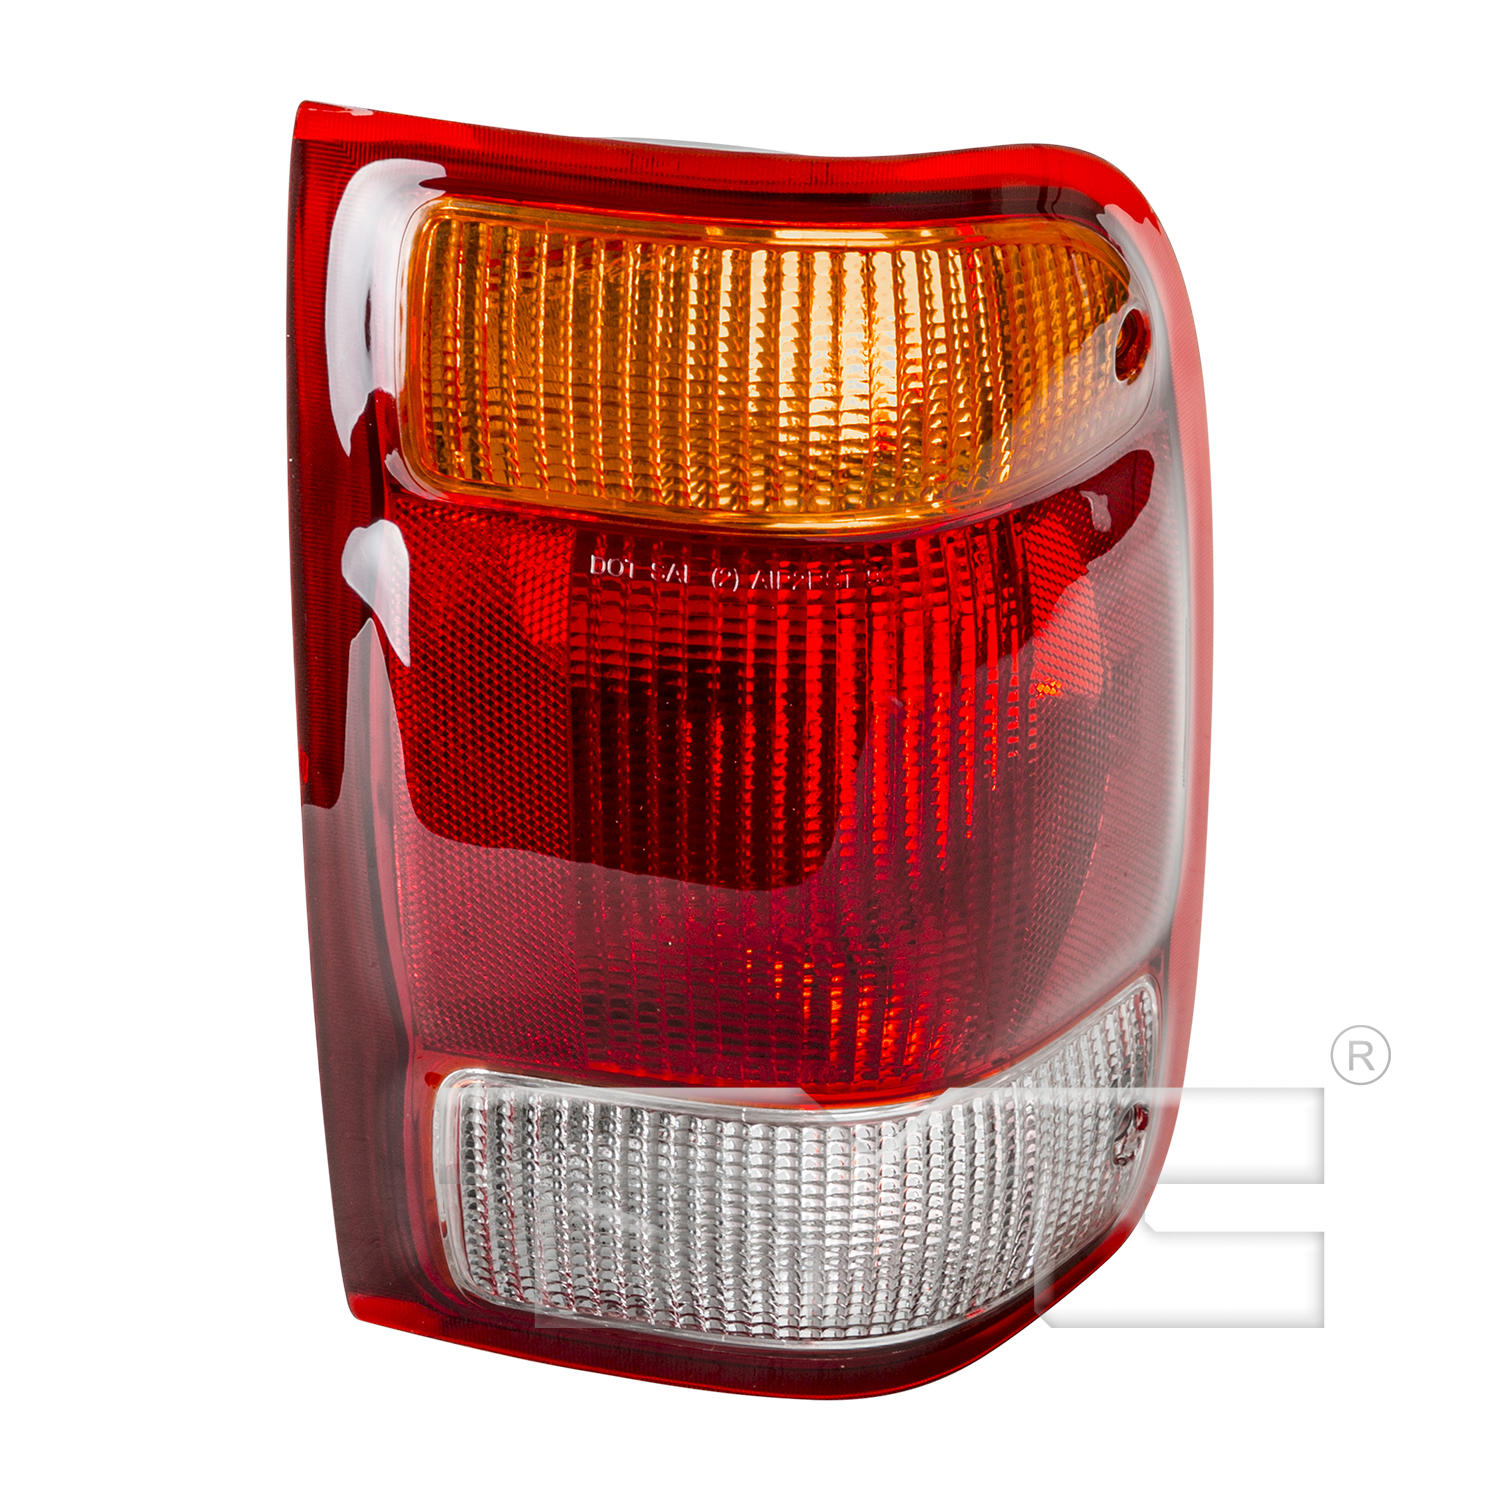 Aftermarket TAILLIGHTS for FORD - RANGER, RANGER,98-99,RT Taillamp assy